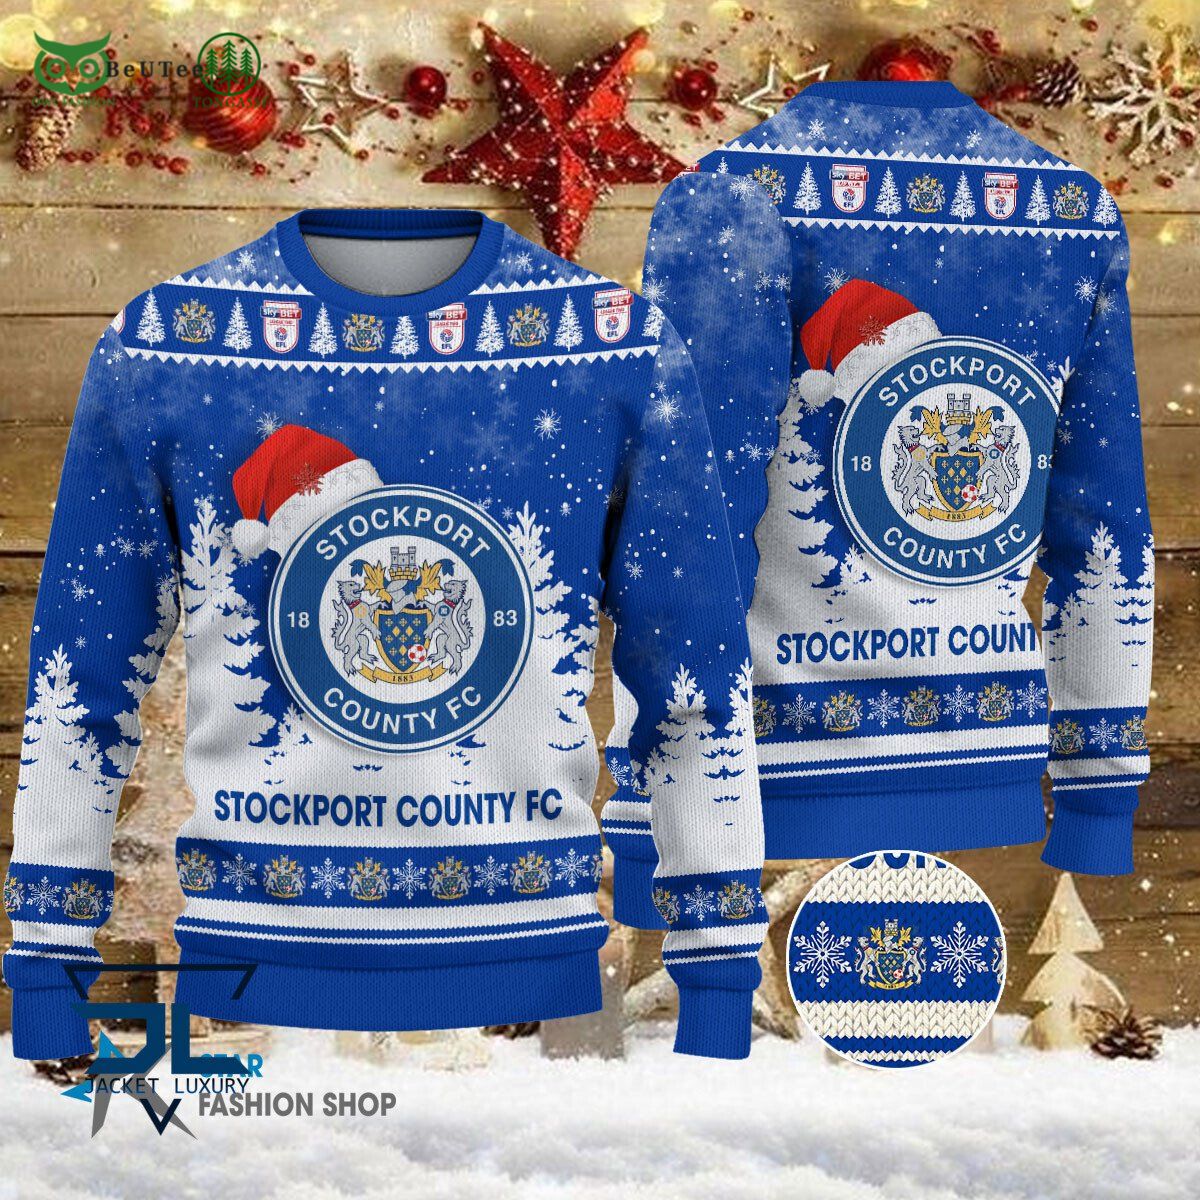 stockport county fc efl english football league premium ugly sweater 1 zDIBl